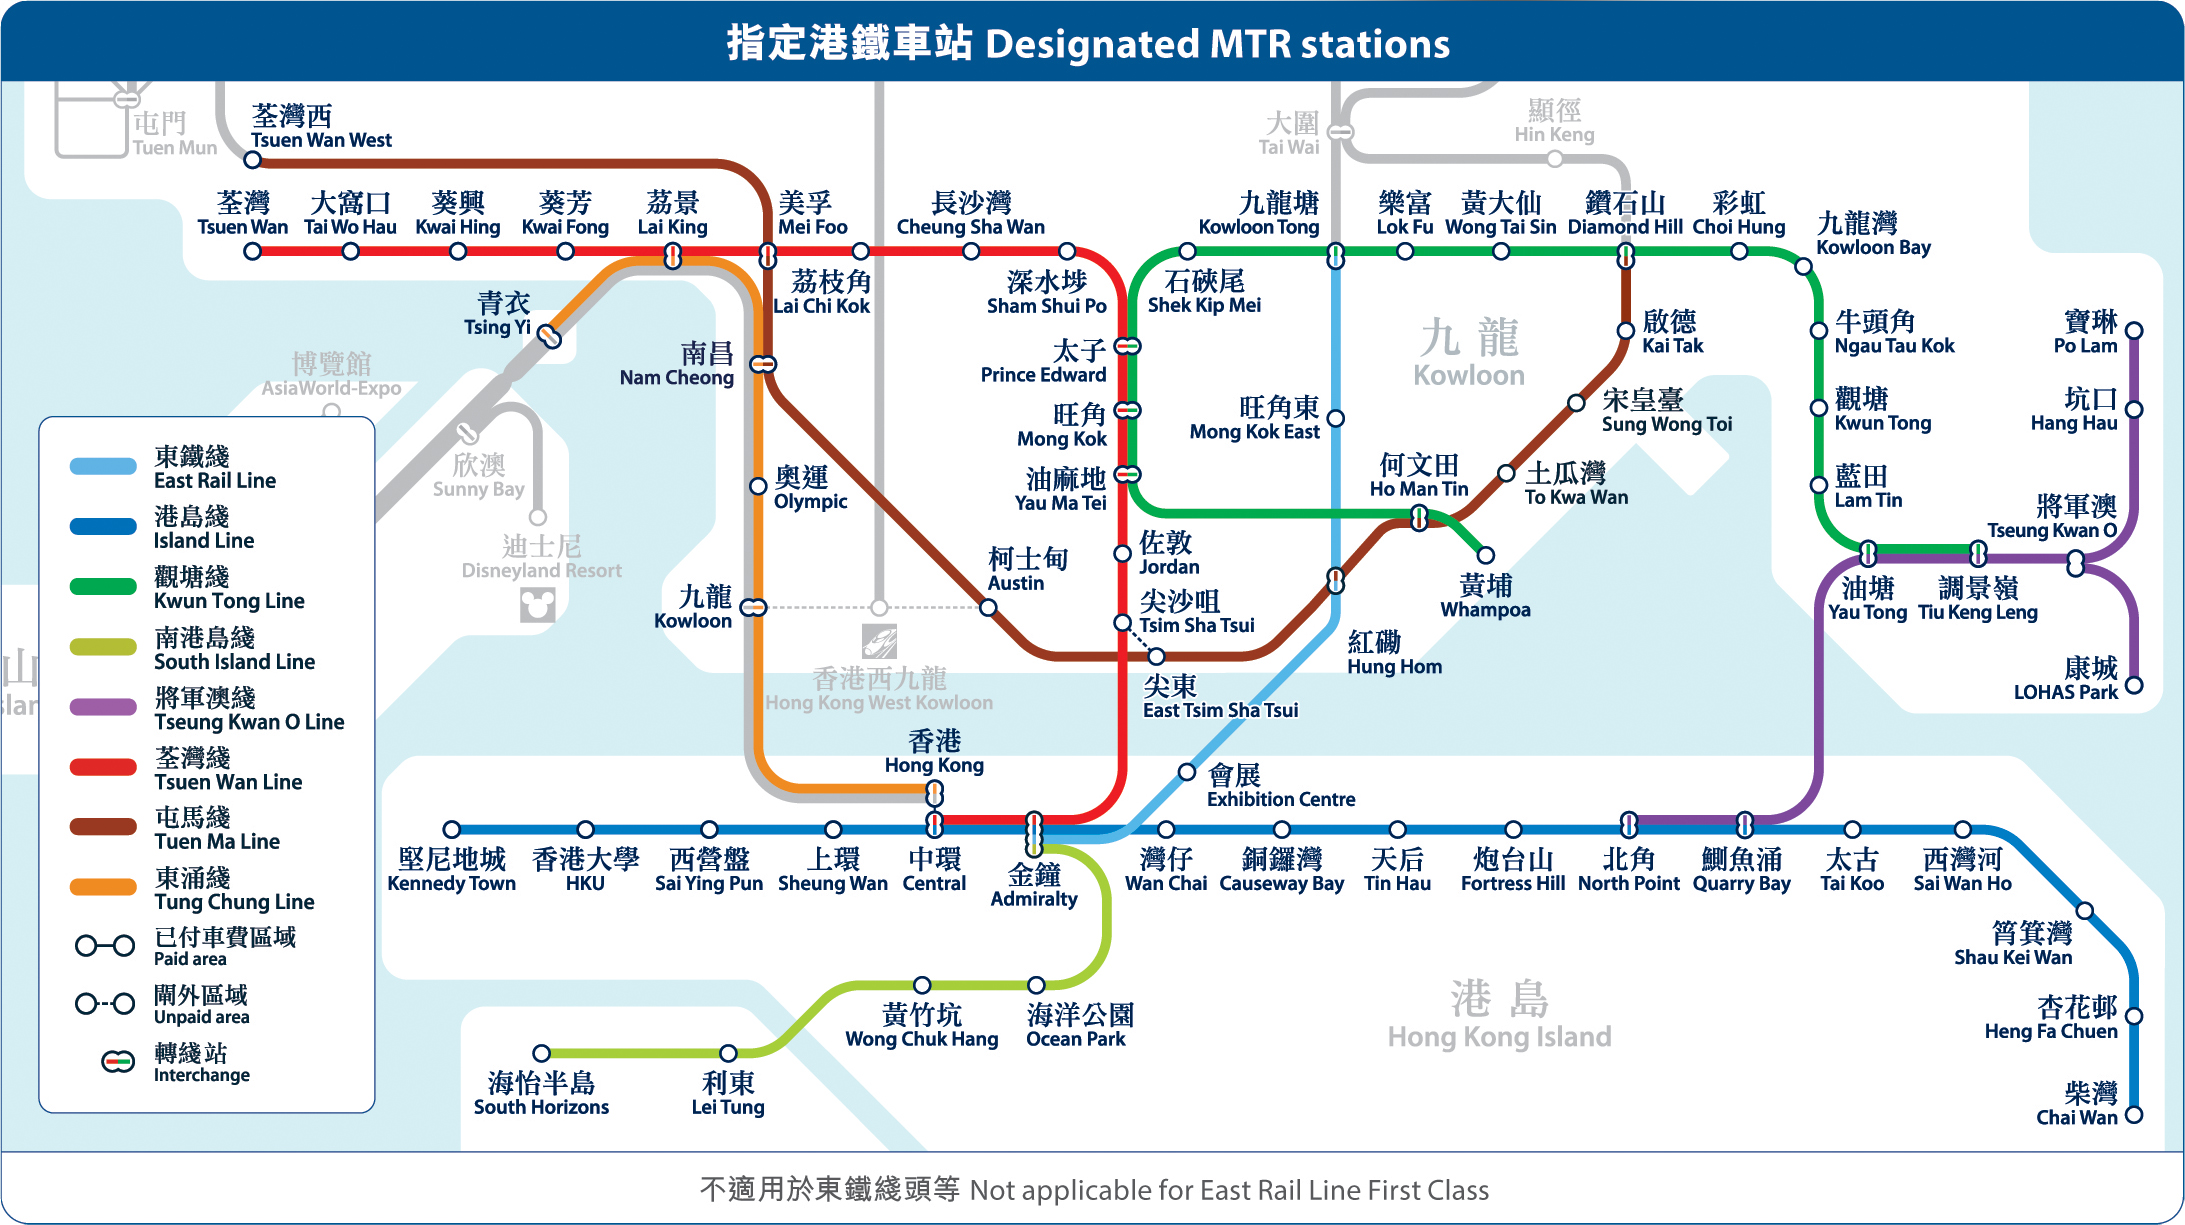 City Saver is valid for travel between designated stations – the Island Line, Kwun Tong Line, Tseung Kwan O Line, Tsuen Wan Line, South Island Line, East Rail Line (stations between Hung Hom and Kowloon Tong), Tung Chung Line (stations between Hong Kong and Tsing Yi), Tuen Ma Line (stations between Diamond Hill and Tsuen Wan West).